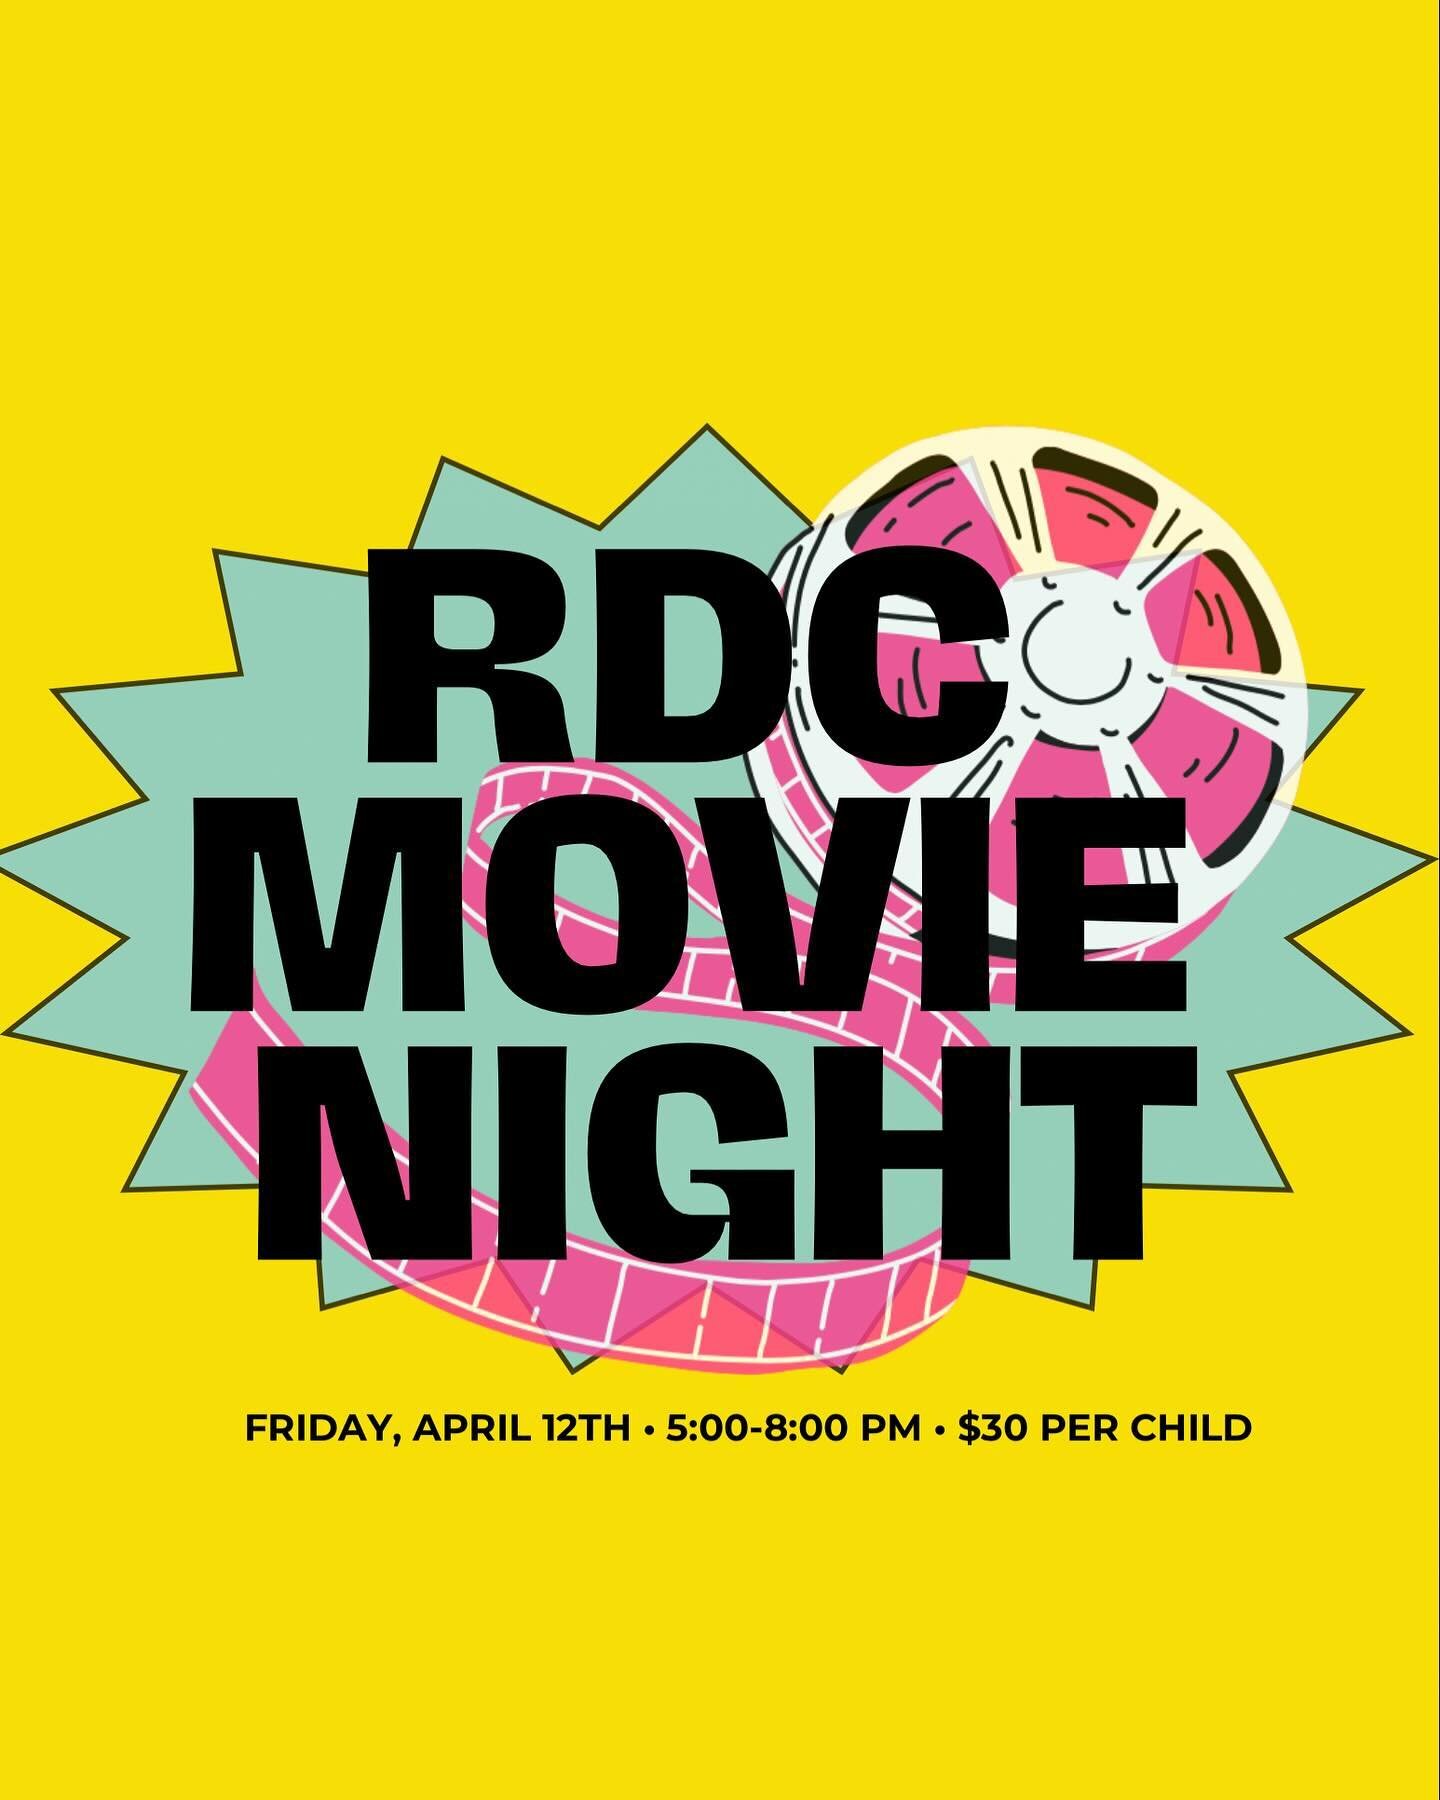 🍿RDC MOVIE NIGHT! 🍿 
Friday, April 12th from 5:00-8:00 PM
Any local parents need a night out? BRING THEM TO OUR MOVIE NIGHT! 
RDC will hosting a movie night for $30 per child! No dance experience needed as this evening will consist of bracelet maki